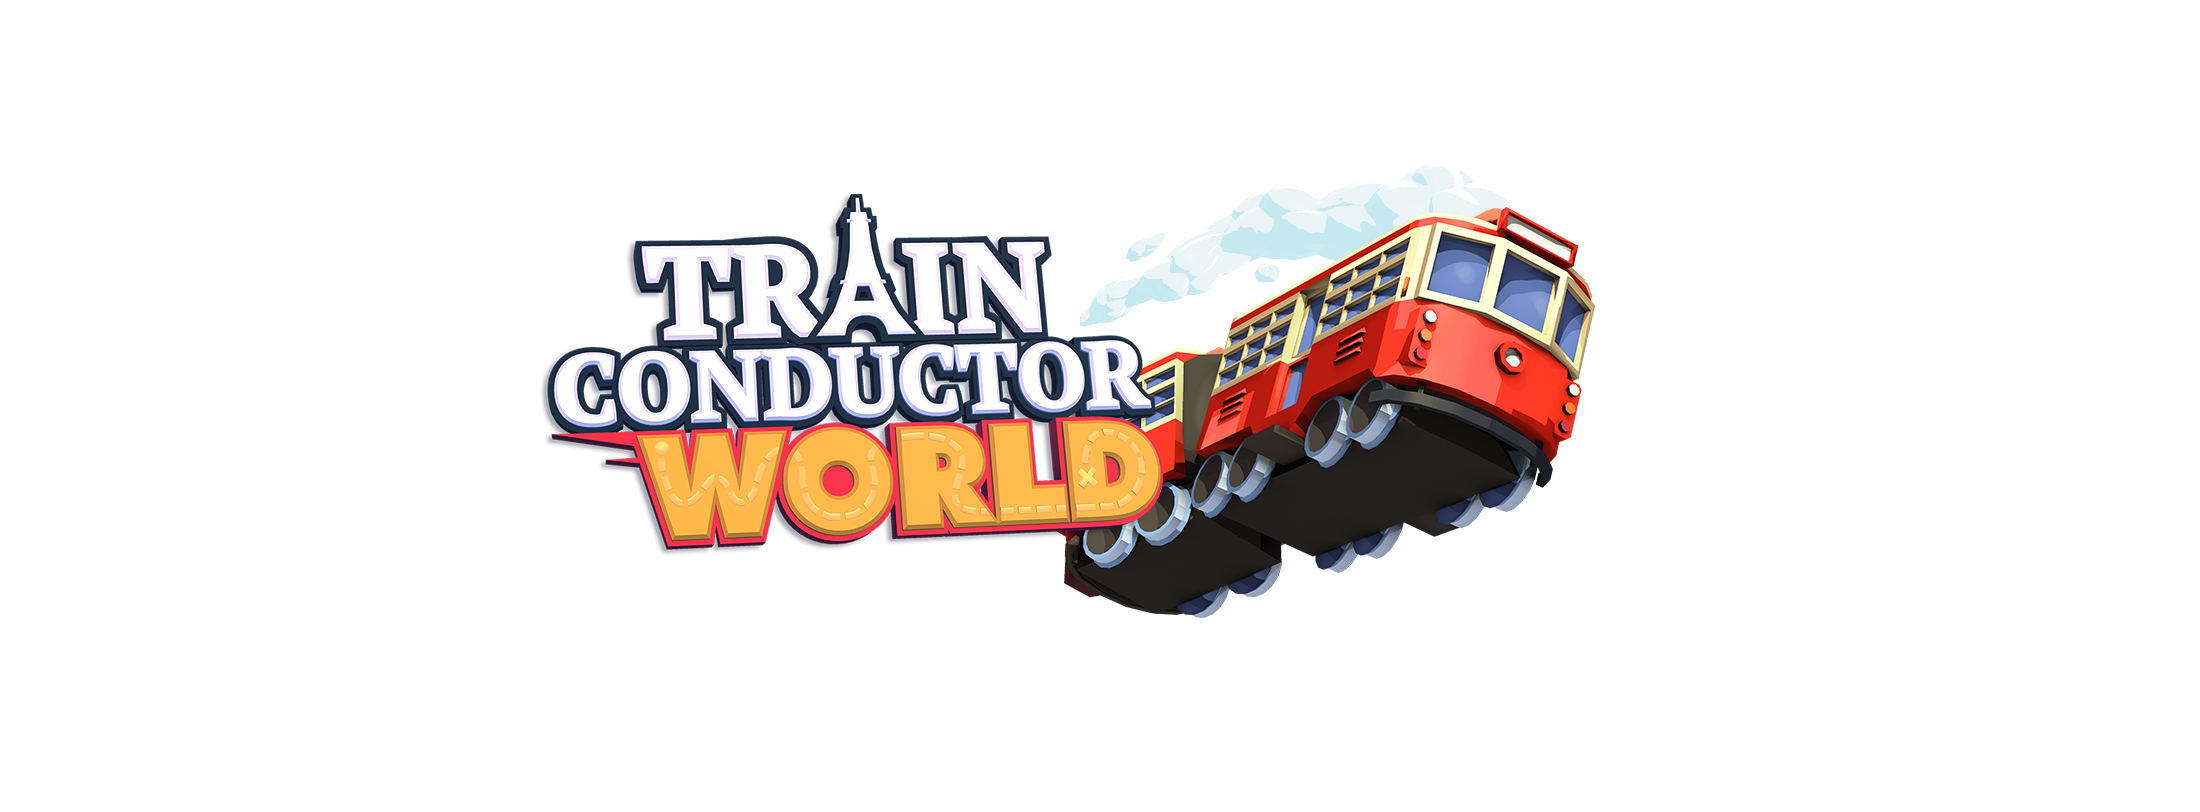 Train Conductor World banner image front layer